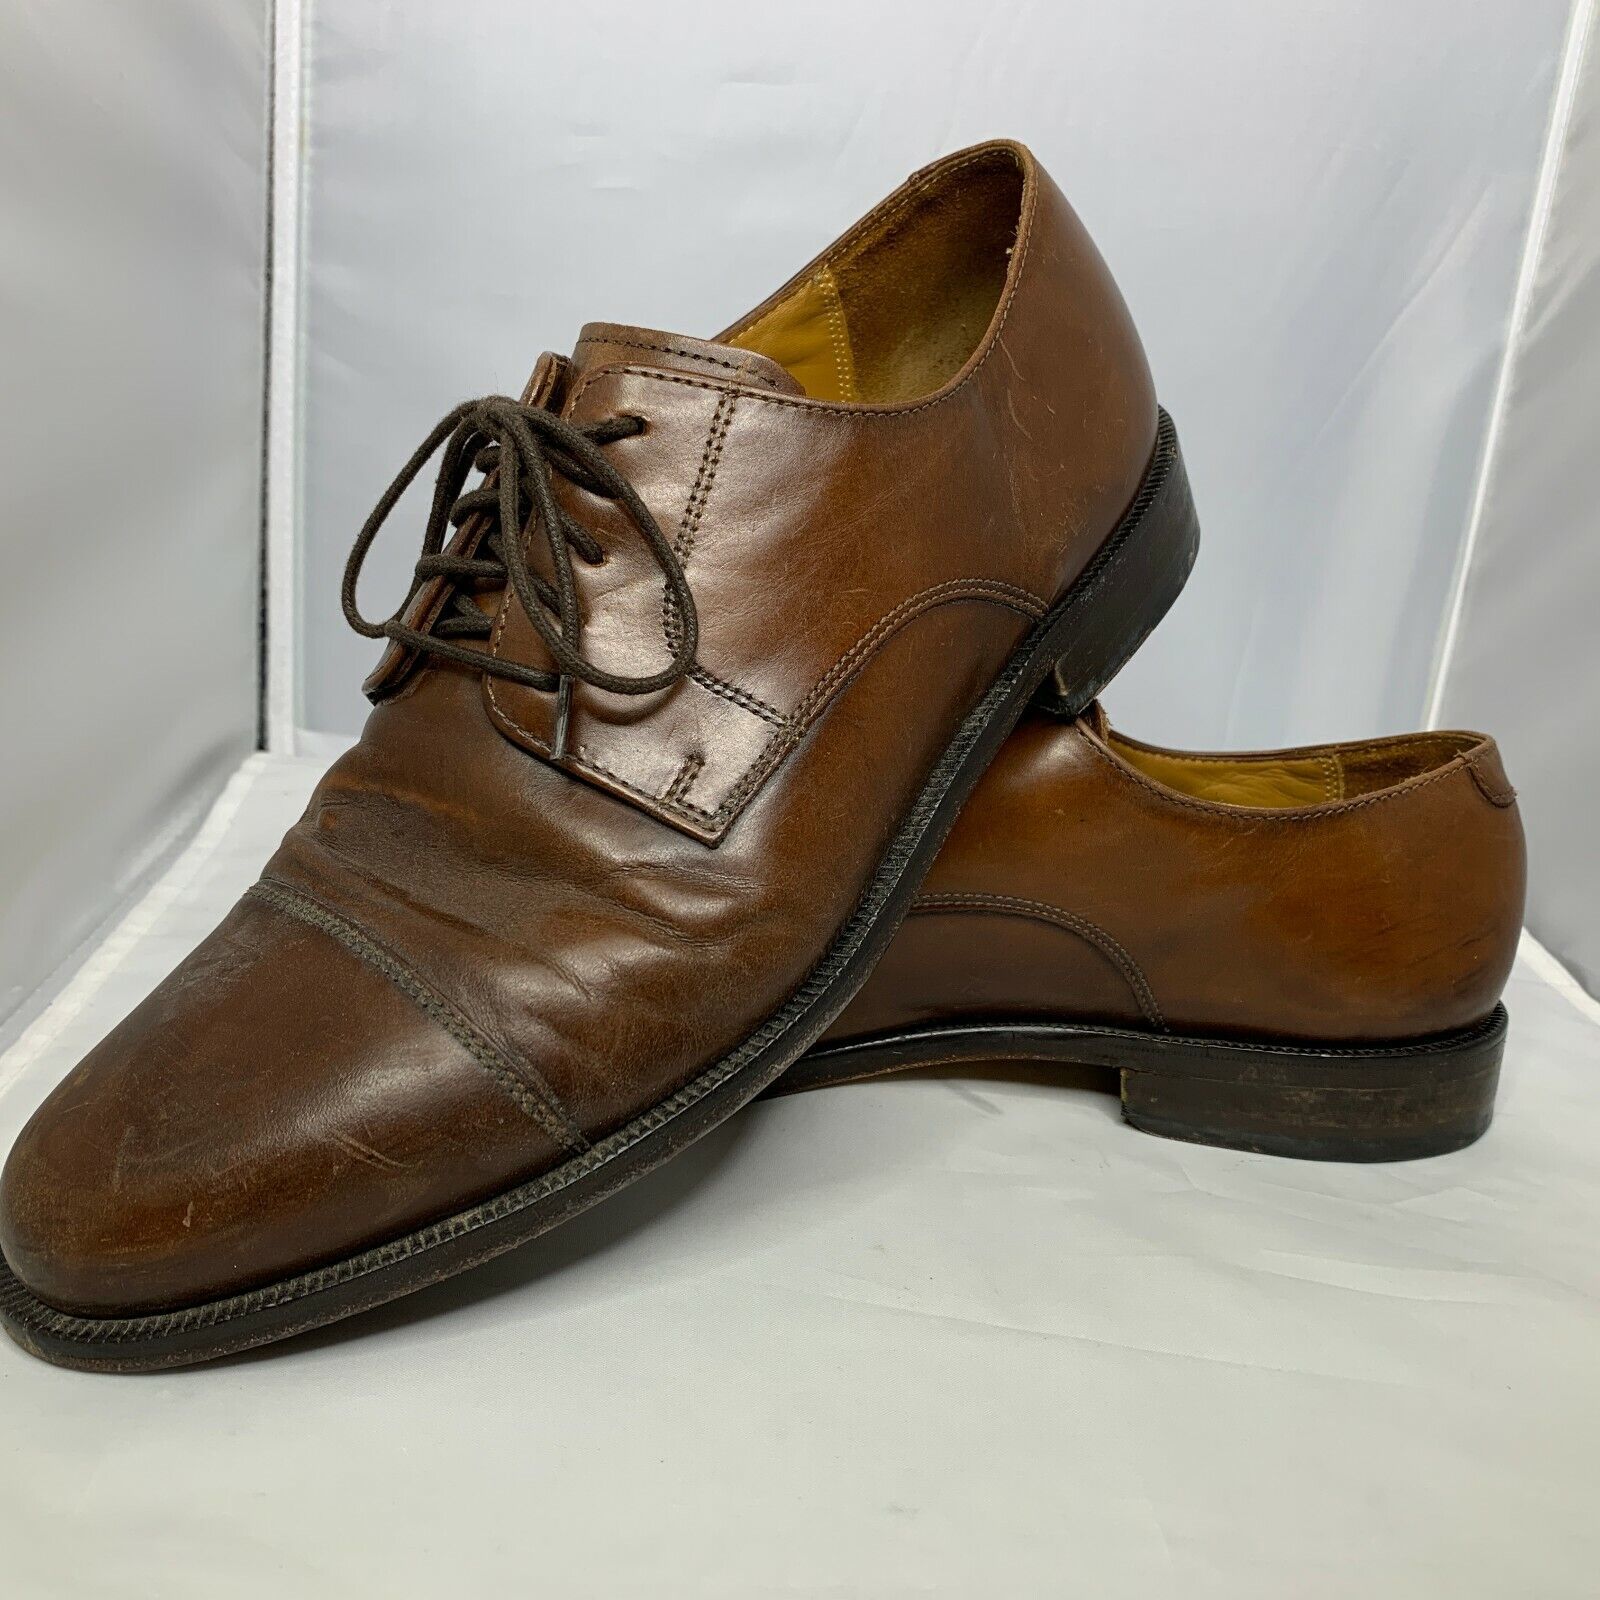 Primary image for Cole Haan Cap Toe Derby Dress Oxford Shoes Size 9.5M C07992 Brown Mens Leather